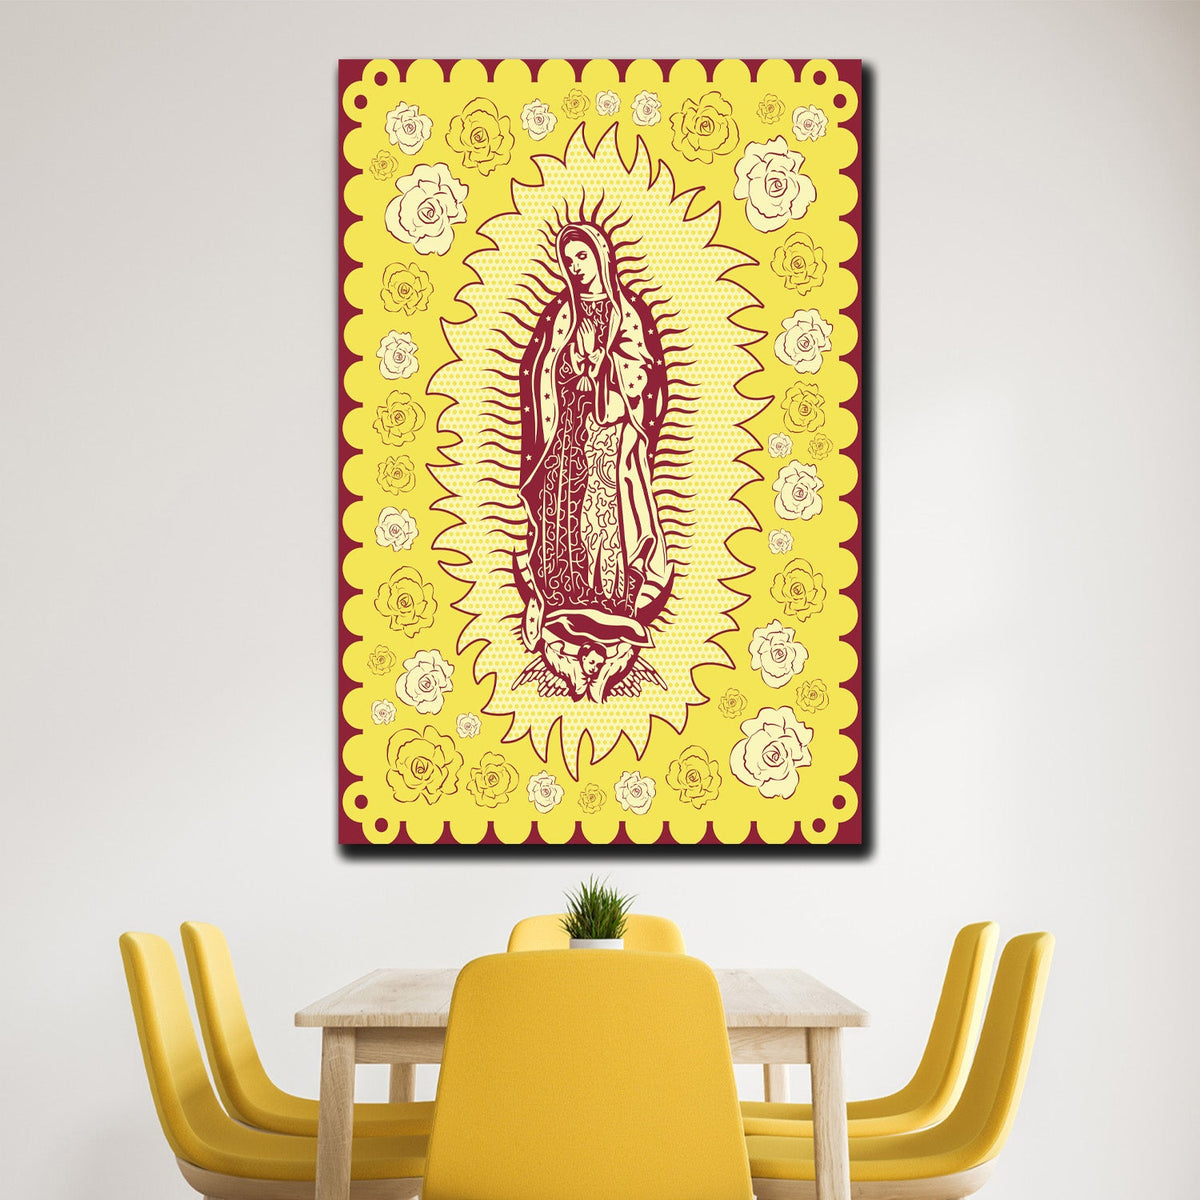 https://cdn.shopify.com/s/files/1/0387/9986/8044/products/OurLadyofGuadalupeCanvasArtprintStretched-1.jpg